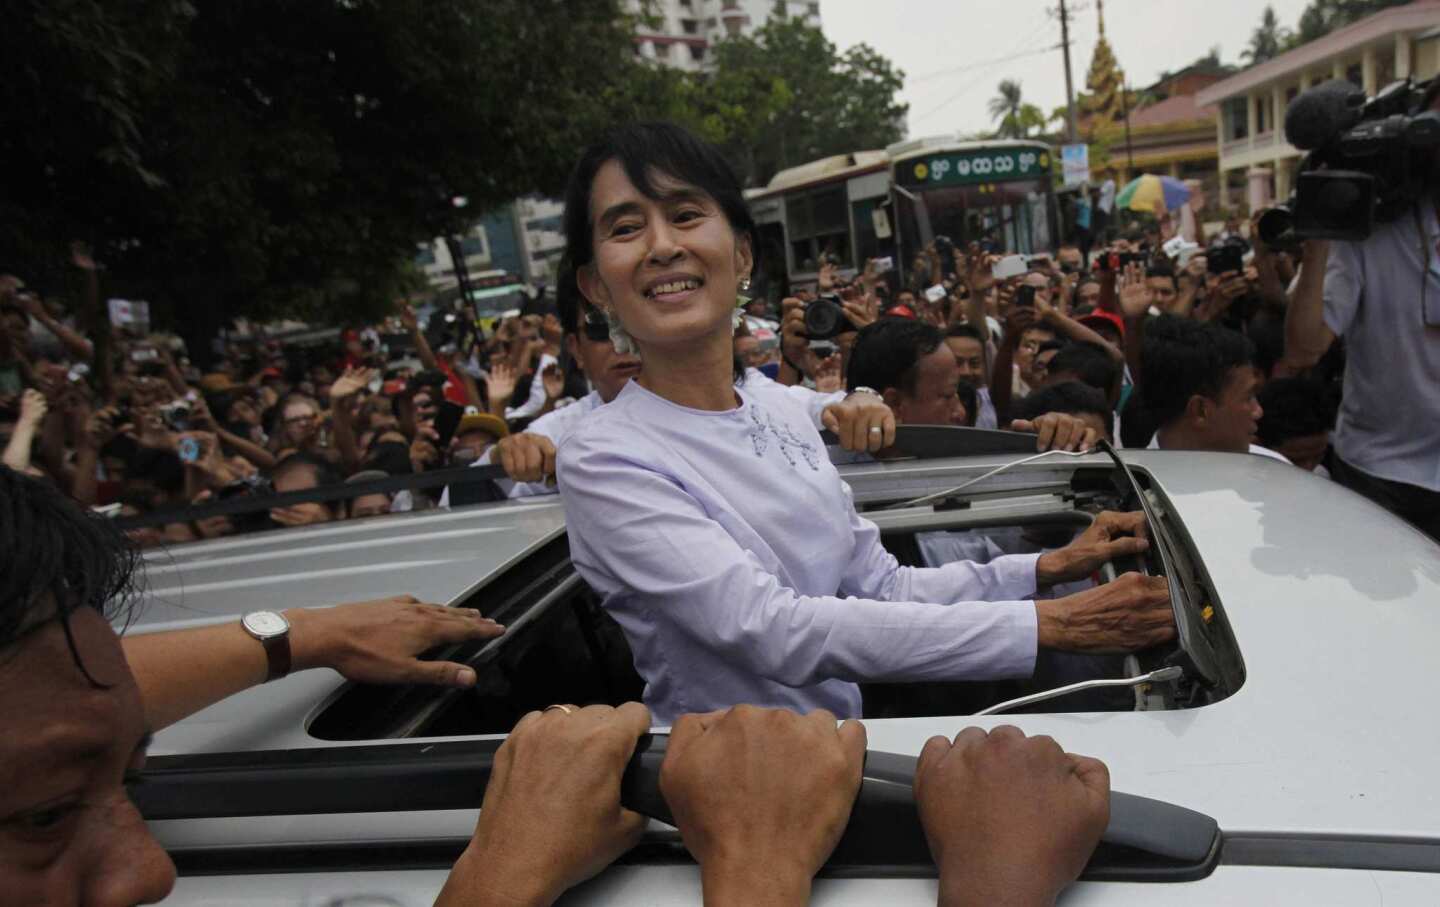 Opposition leader Aung San Suu Kyi acknowledges supporters from her car as she leaves after a brief visit to the headquarters of her National League for Democracy Party in Yangon, Myanmar. Suu Kyi said she hopes her victory in a landmark election will mark the beginning of a new era for Myanmar.